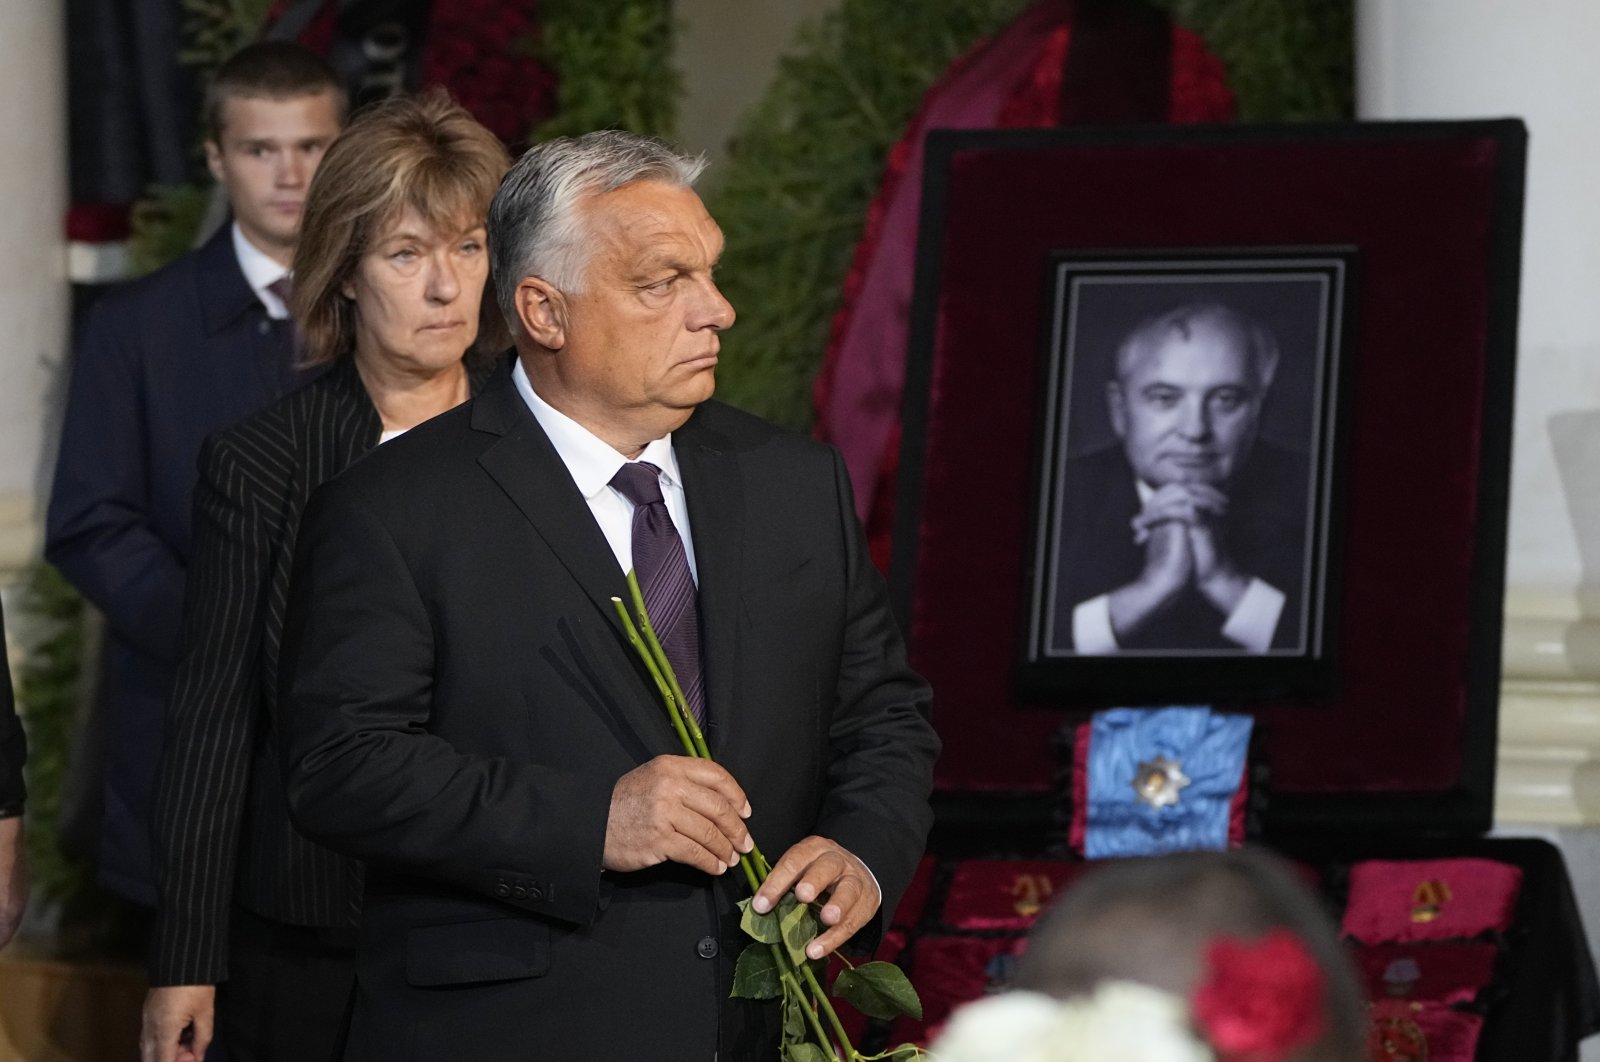 Hungarian Prime Minister Viktor Orban lays flowers on the coffin of the late former Soviet president Mikhail Gorbachev during a farewell ceremony at the Hall of Columns of the House of Trade Unions in Moscow, Russia, Sept. 3, 2022. (EPA Photo)